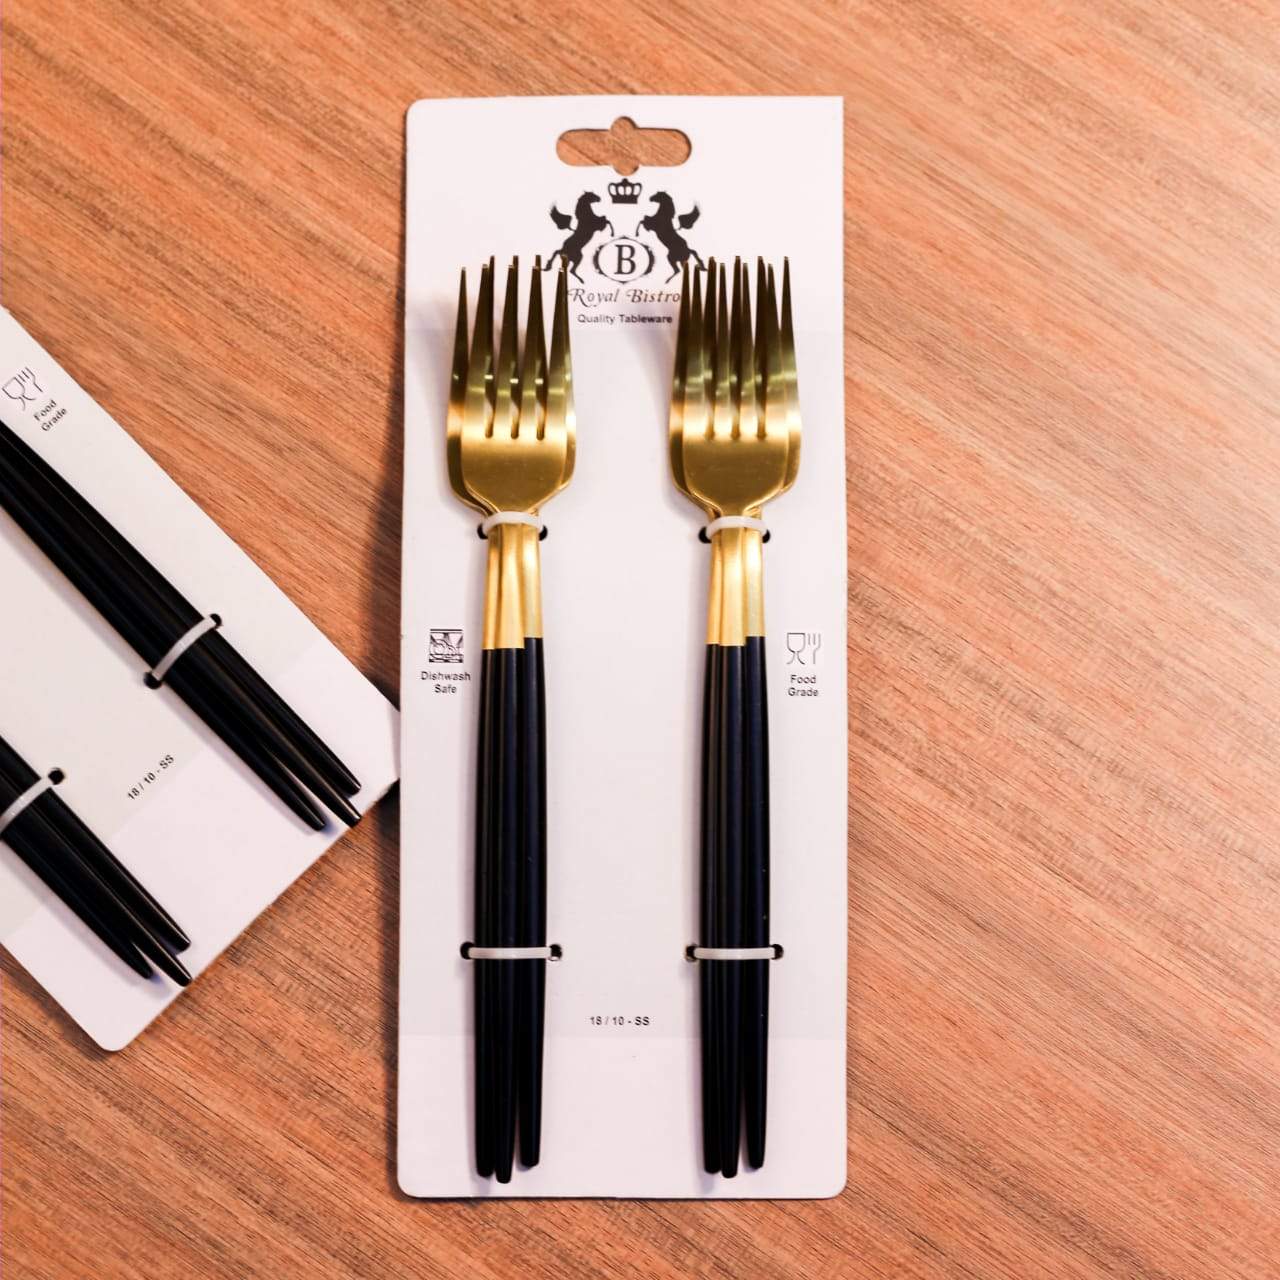 TABLE FORK IR GOLD AND BLACK 2959 SINGLE PIECE (1)